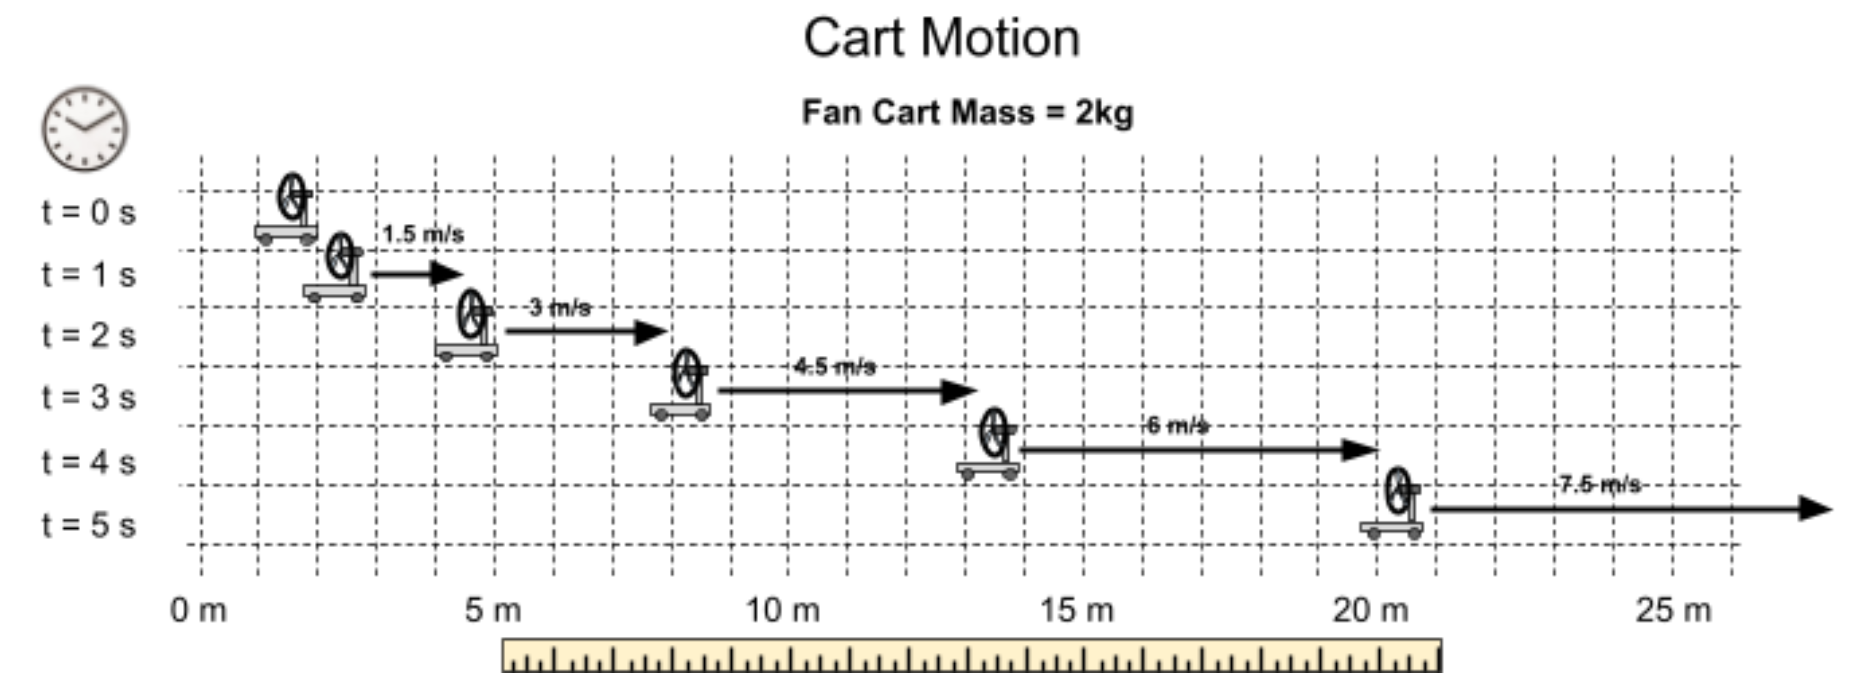 ToC: Image of a Fan Cart Moving on a Graph